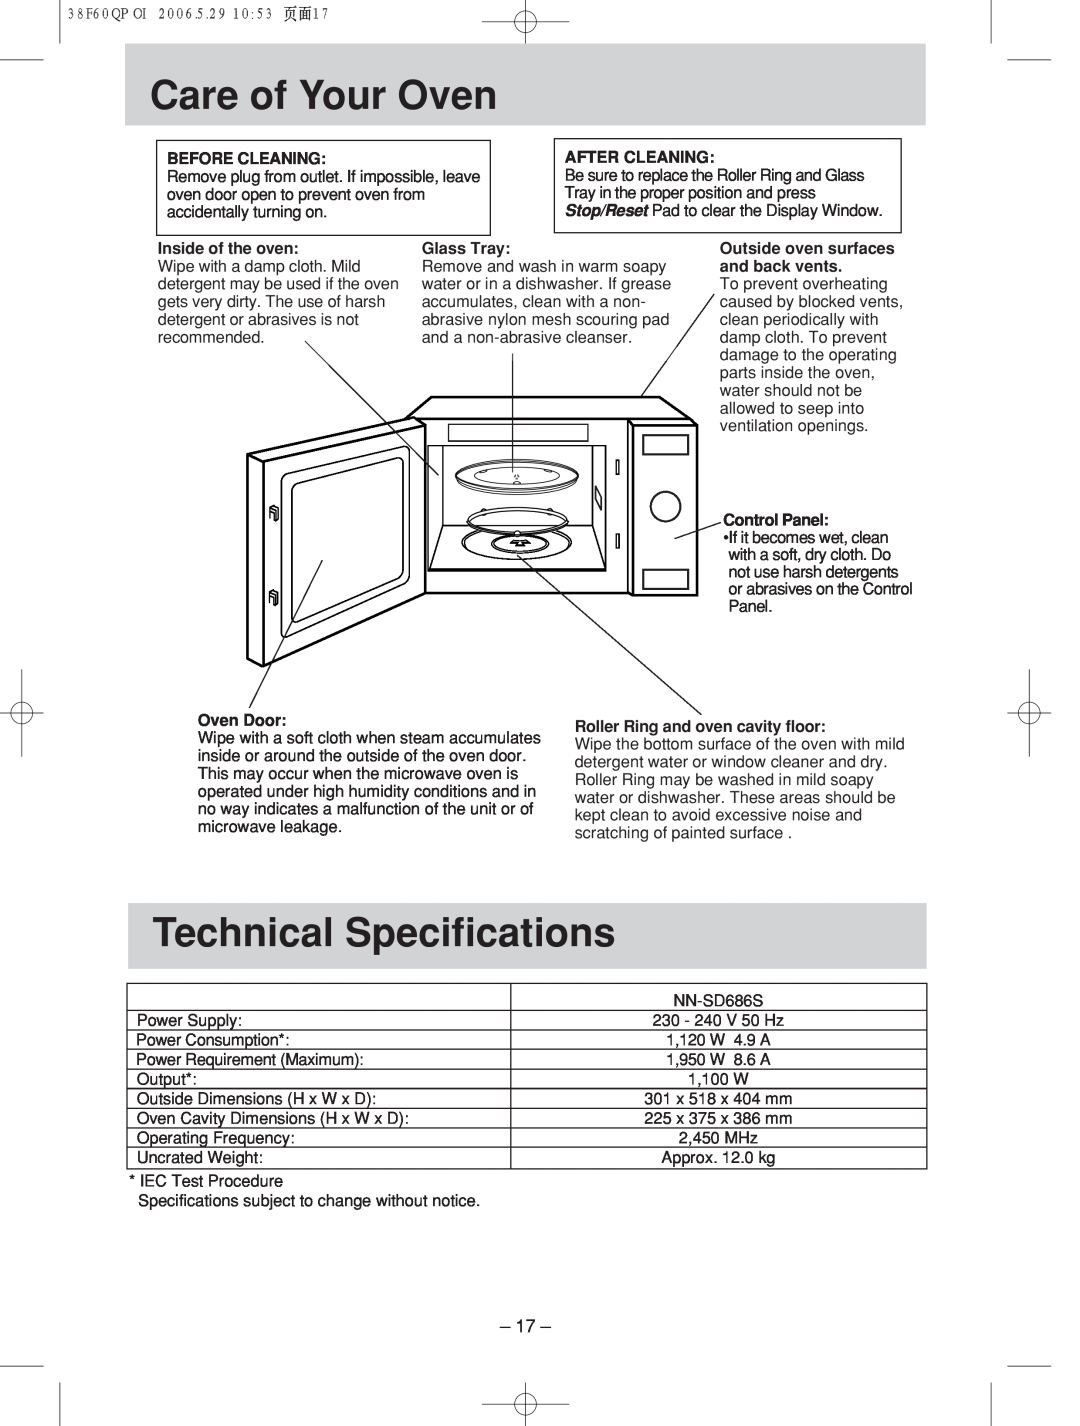 Panasonic nn-sd686s Care!!!!!of! Your Oven, Technical Specifications, Before Cleaning, After Cleaning, Inside of the oven 